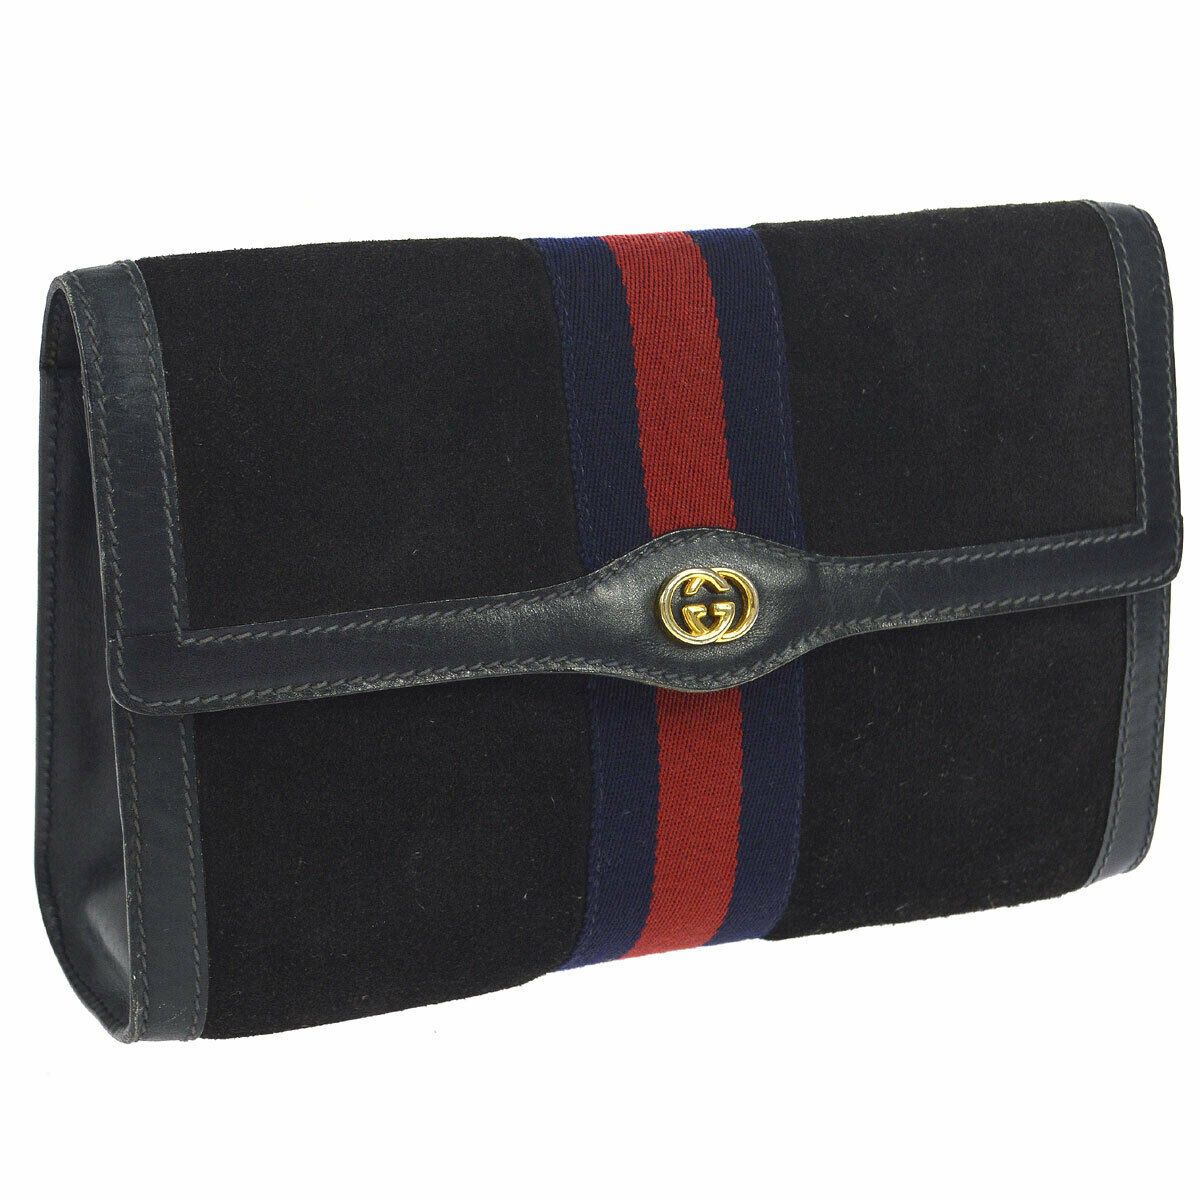 Pre Owned GUCCI PARFUMS Shelly Line Clutch Hand Bag Navy Suede Leather Vintage